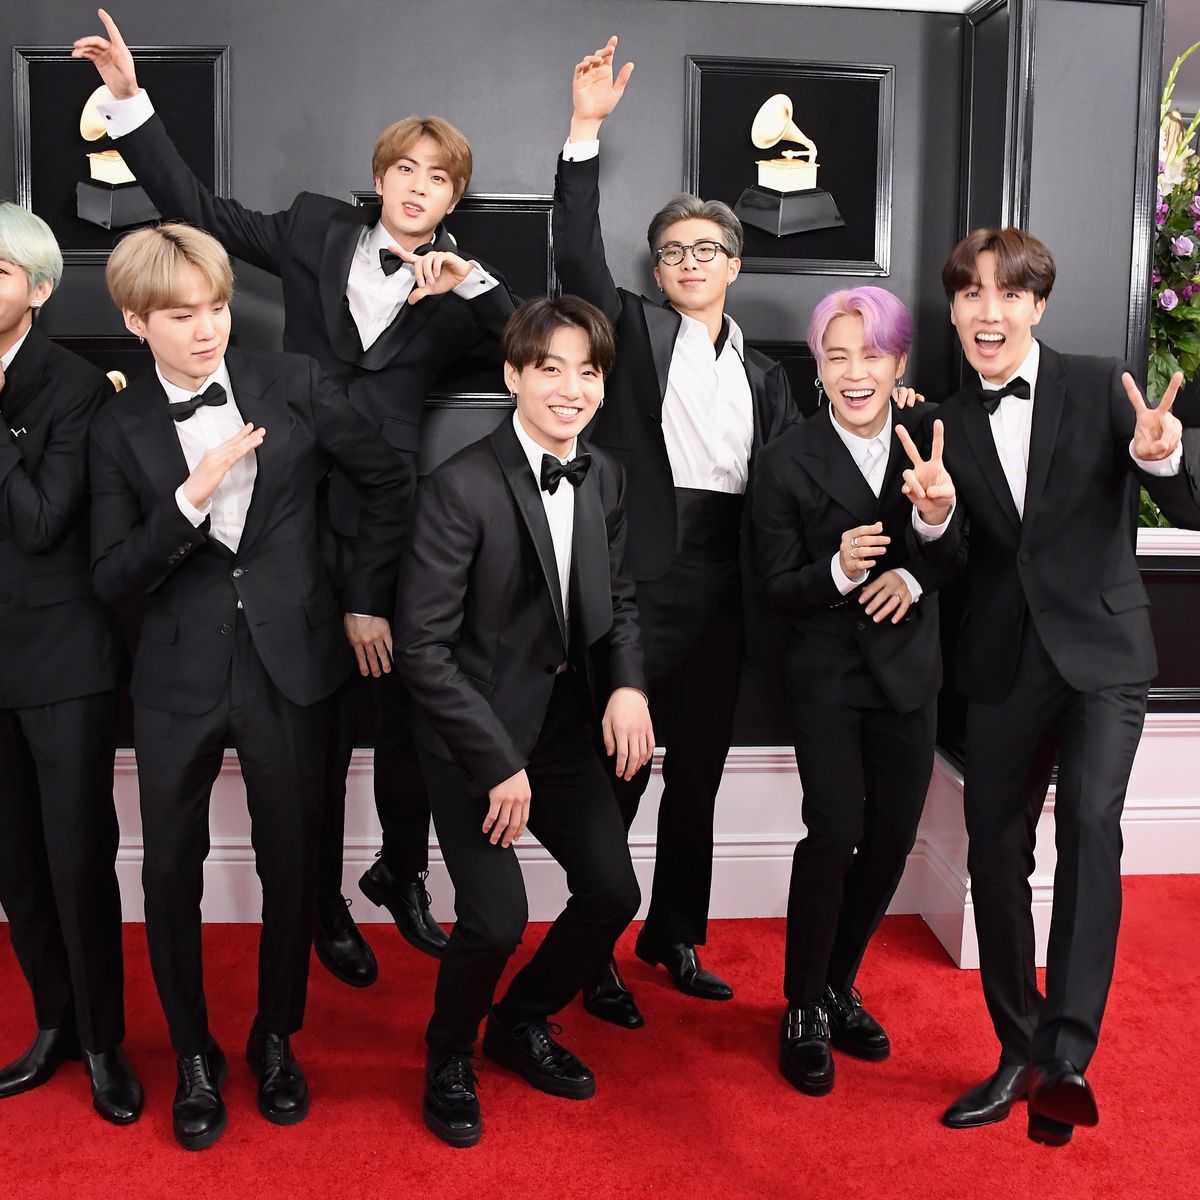 BTS gets snubbed, again, at 2023 Grammys - Los Angeles Times